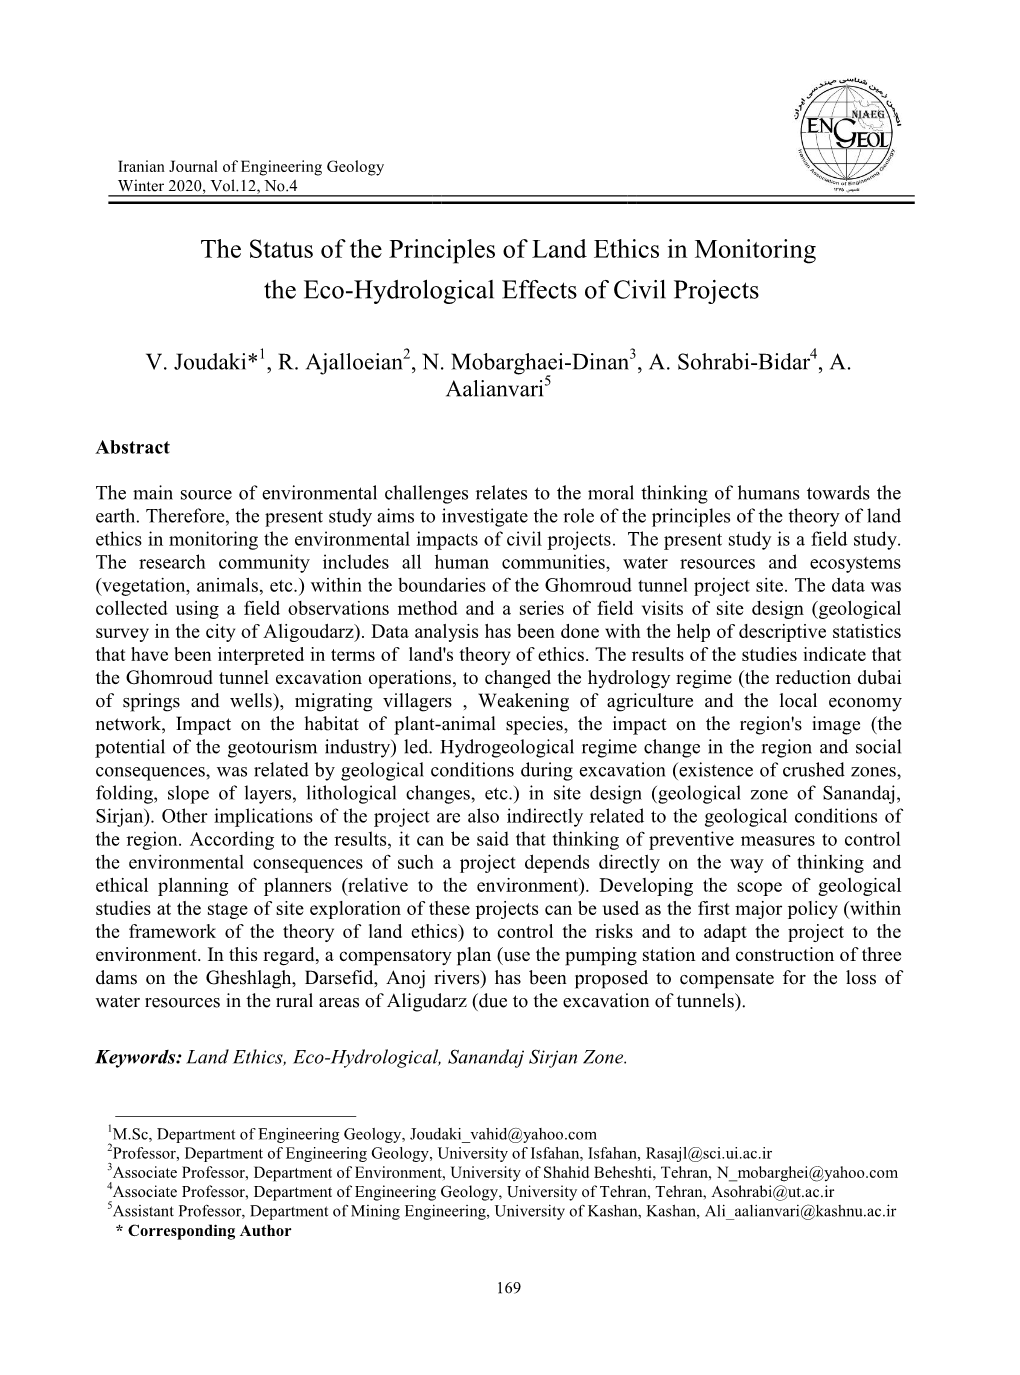 The Status of the Principles of Land Ethics in Monitoring the Eco-Hydrological Effects of Civil Projects